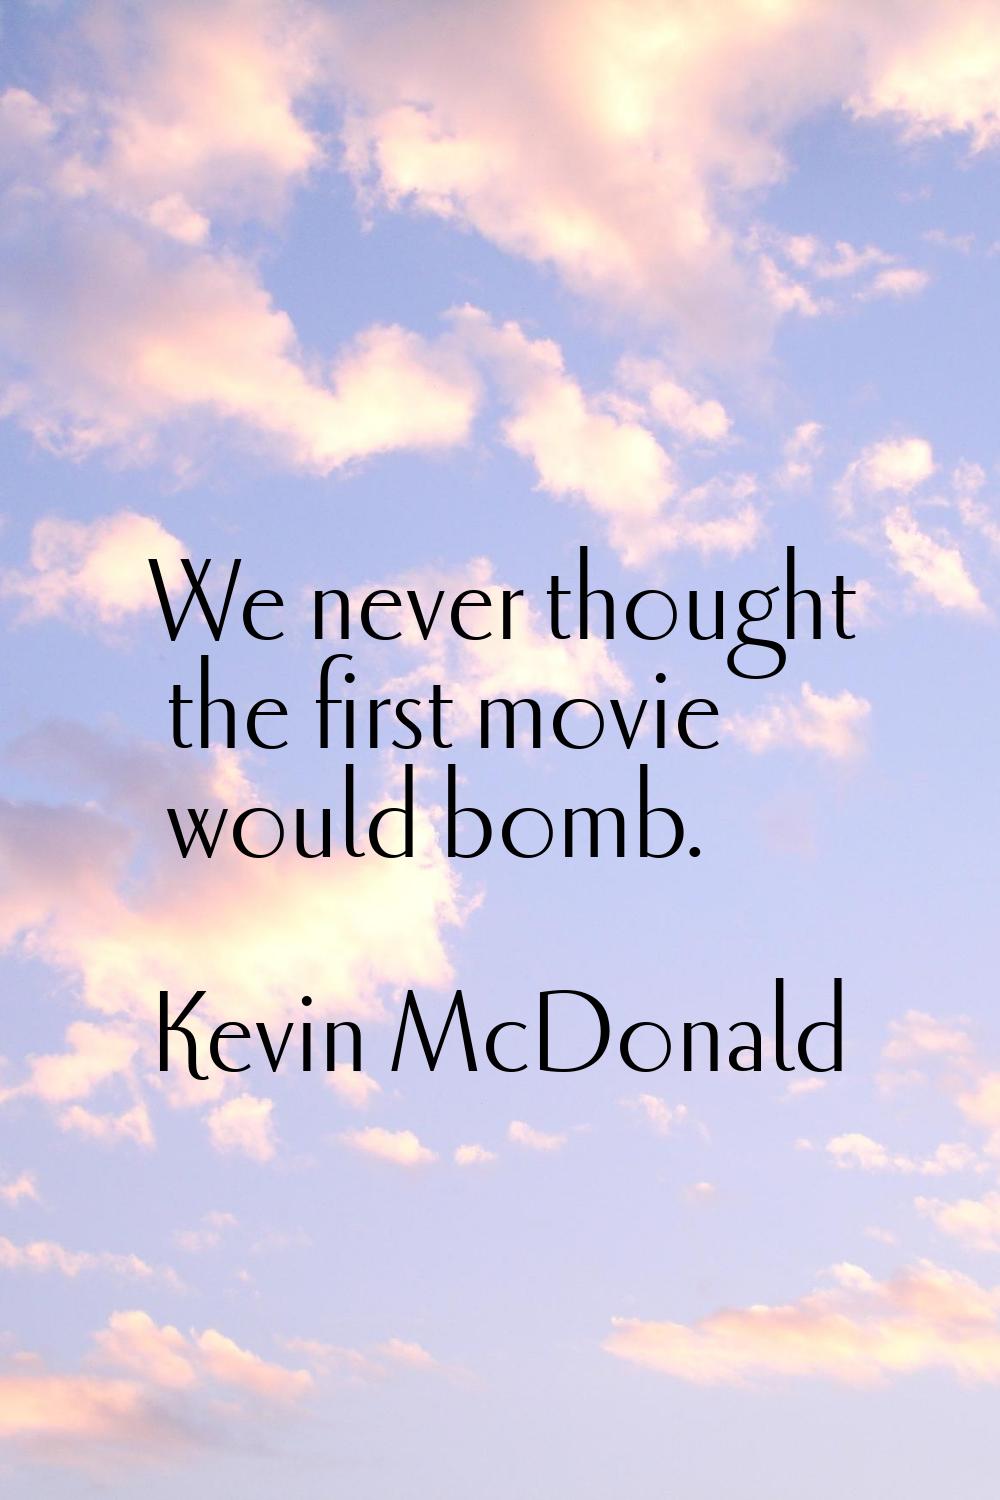 We never thought the first movie would bomb.